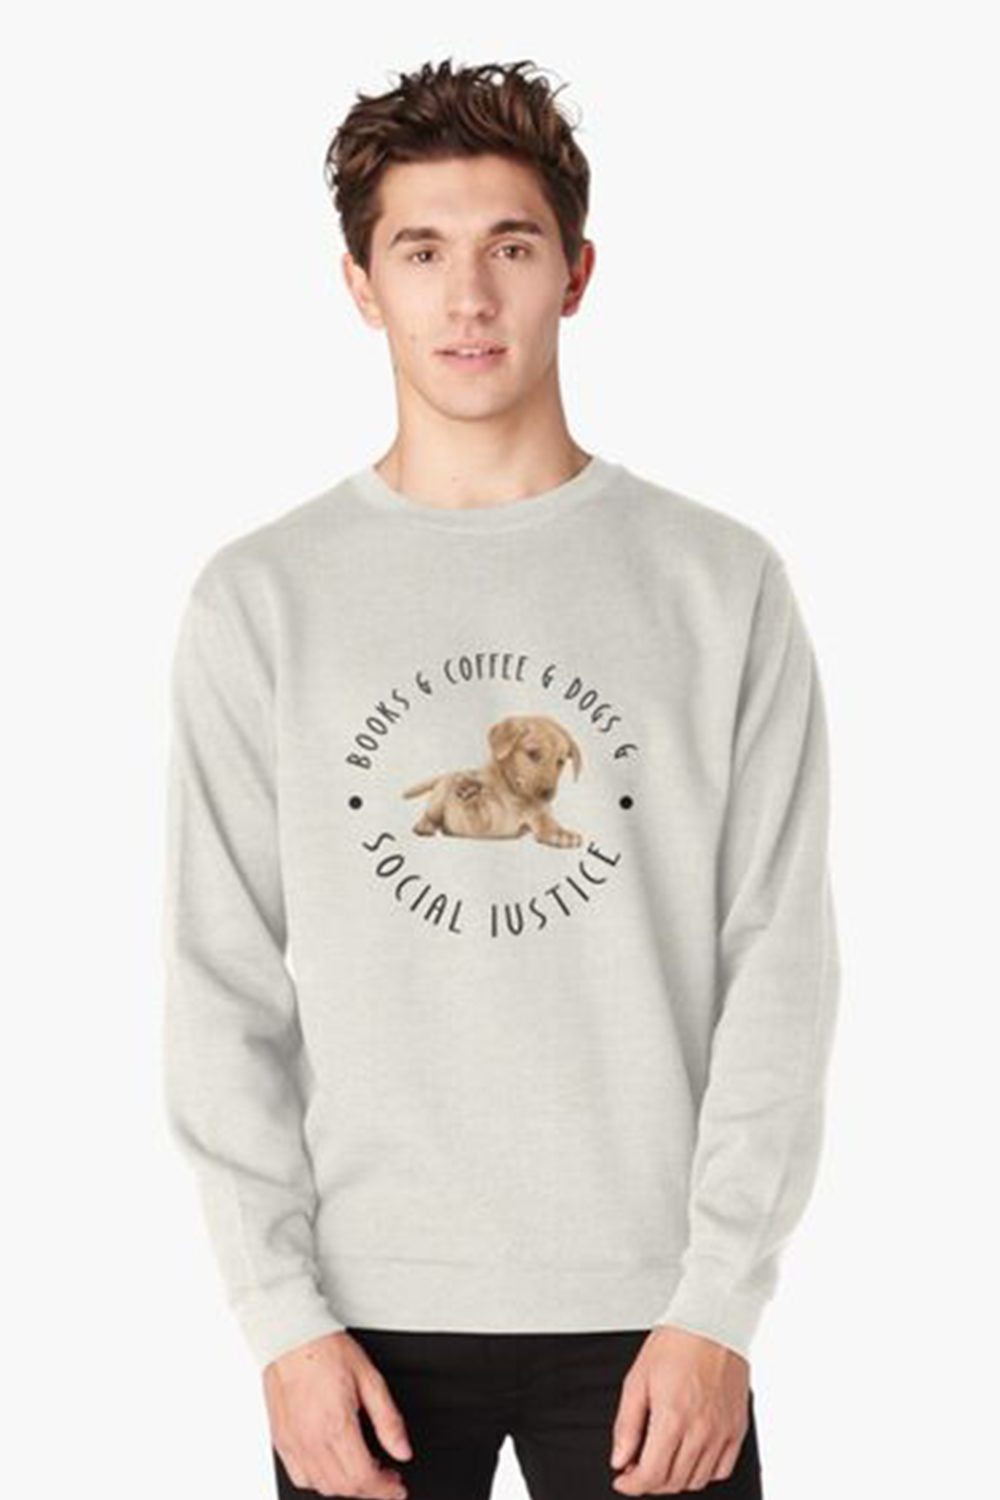 BOOKS & COFFEE & DOGS & SOCIAL JUSTICE Pullover Sweatshirt pinterest preview image.